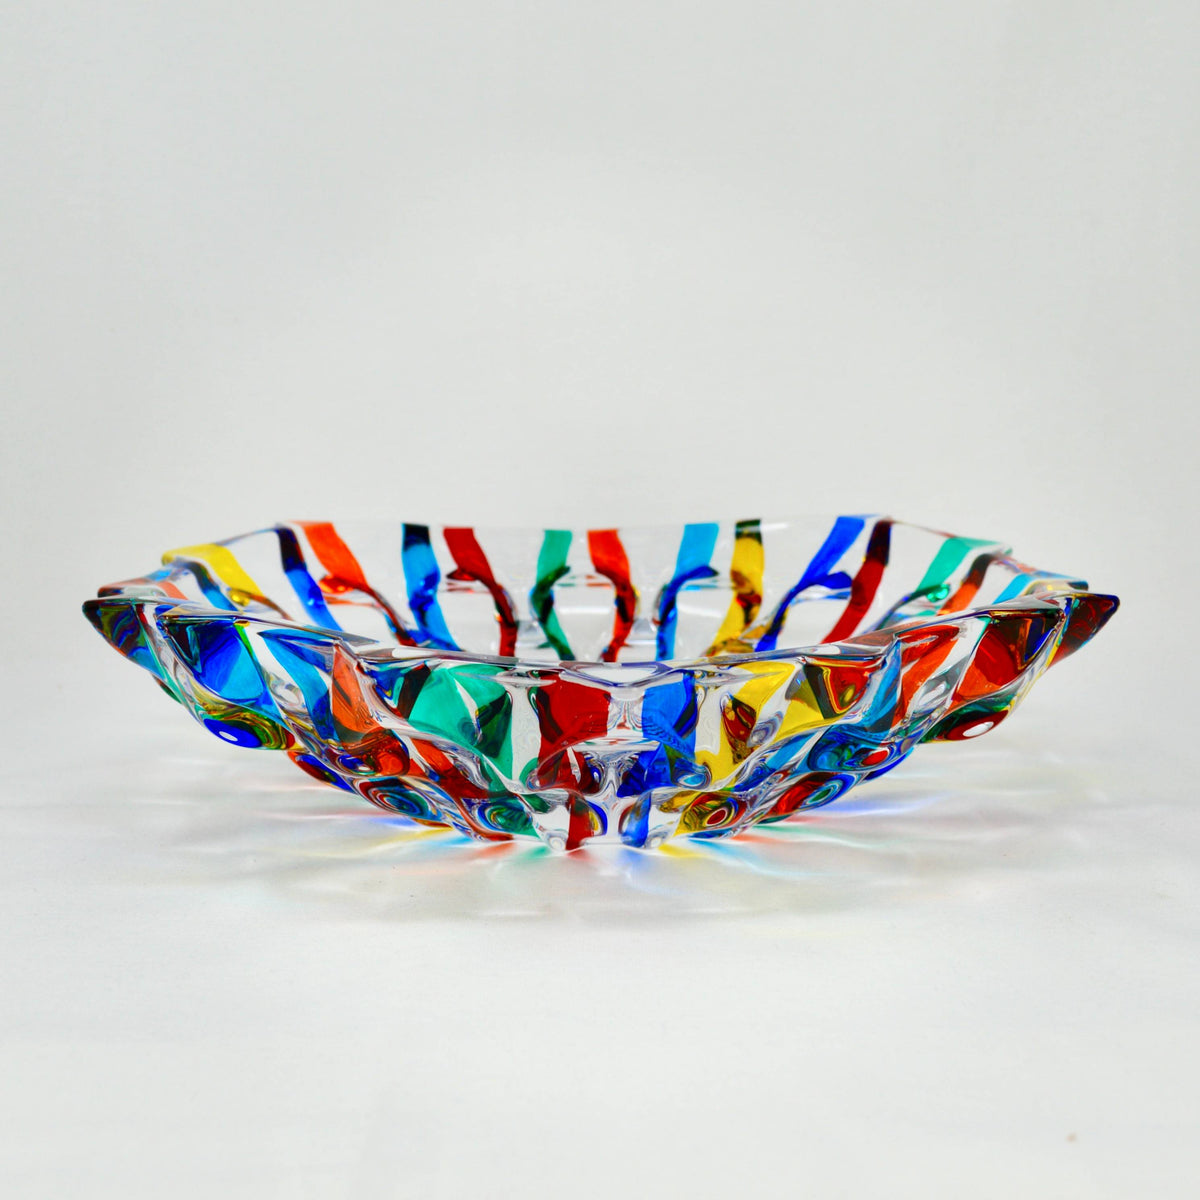 Lyrical Decorative Large Glass Bowl, Round, Hand Painted, Made In Italy - My Italian Decor